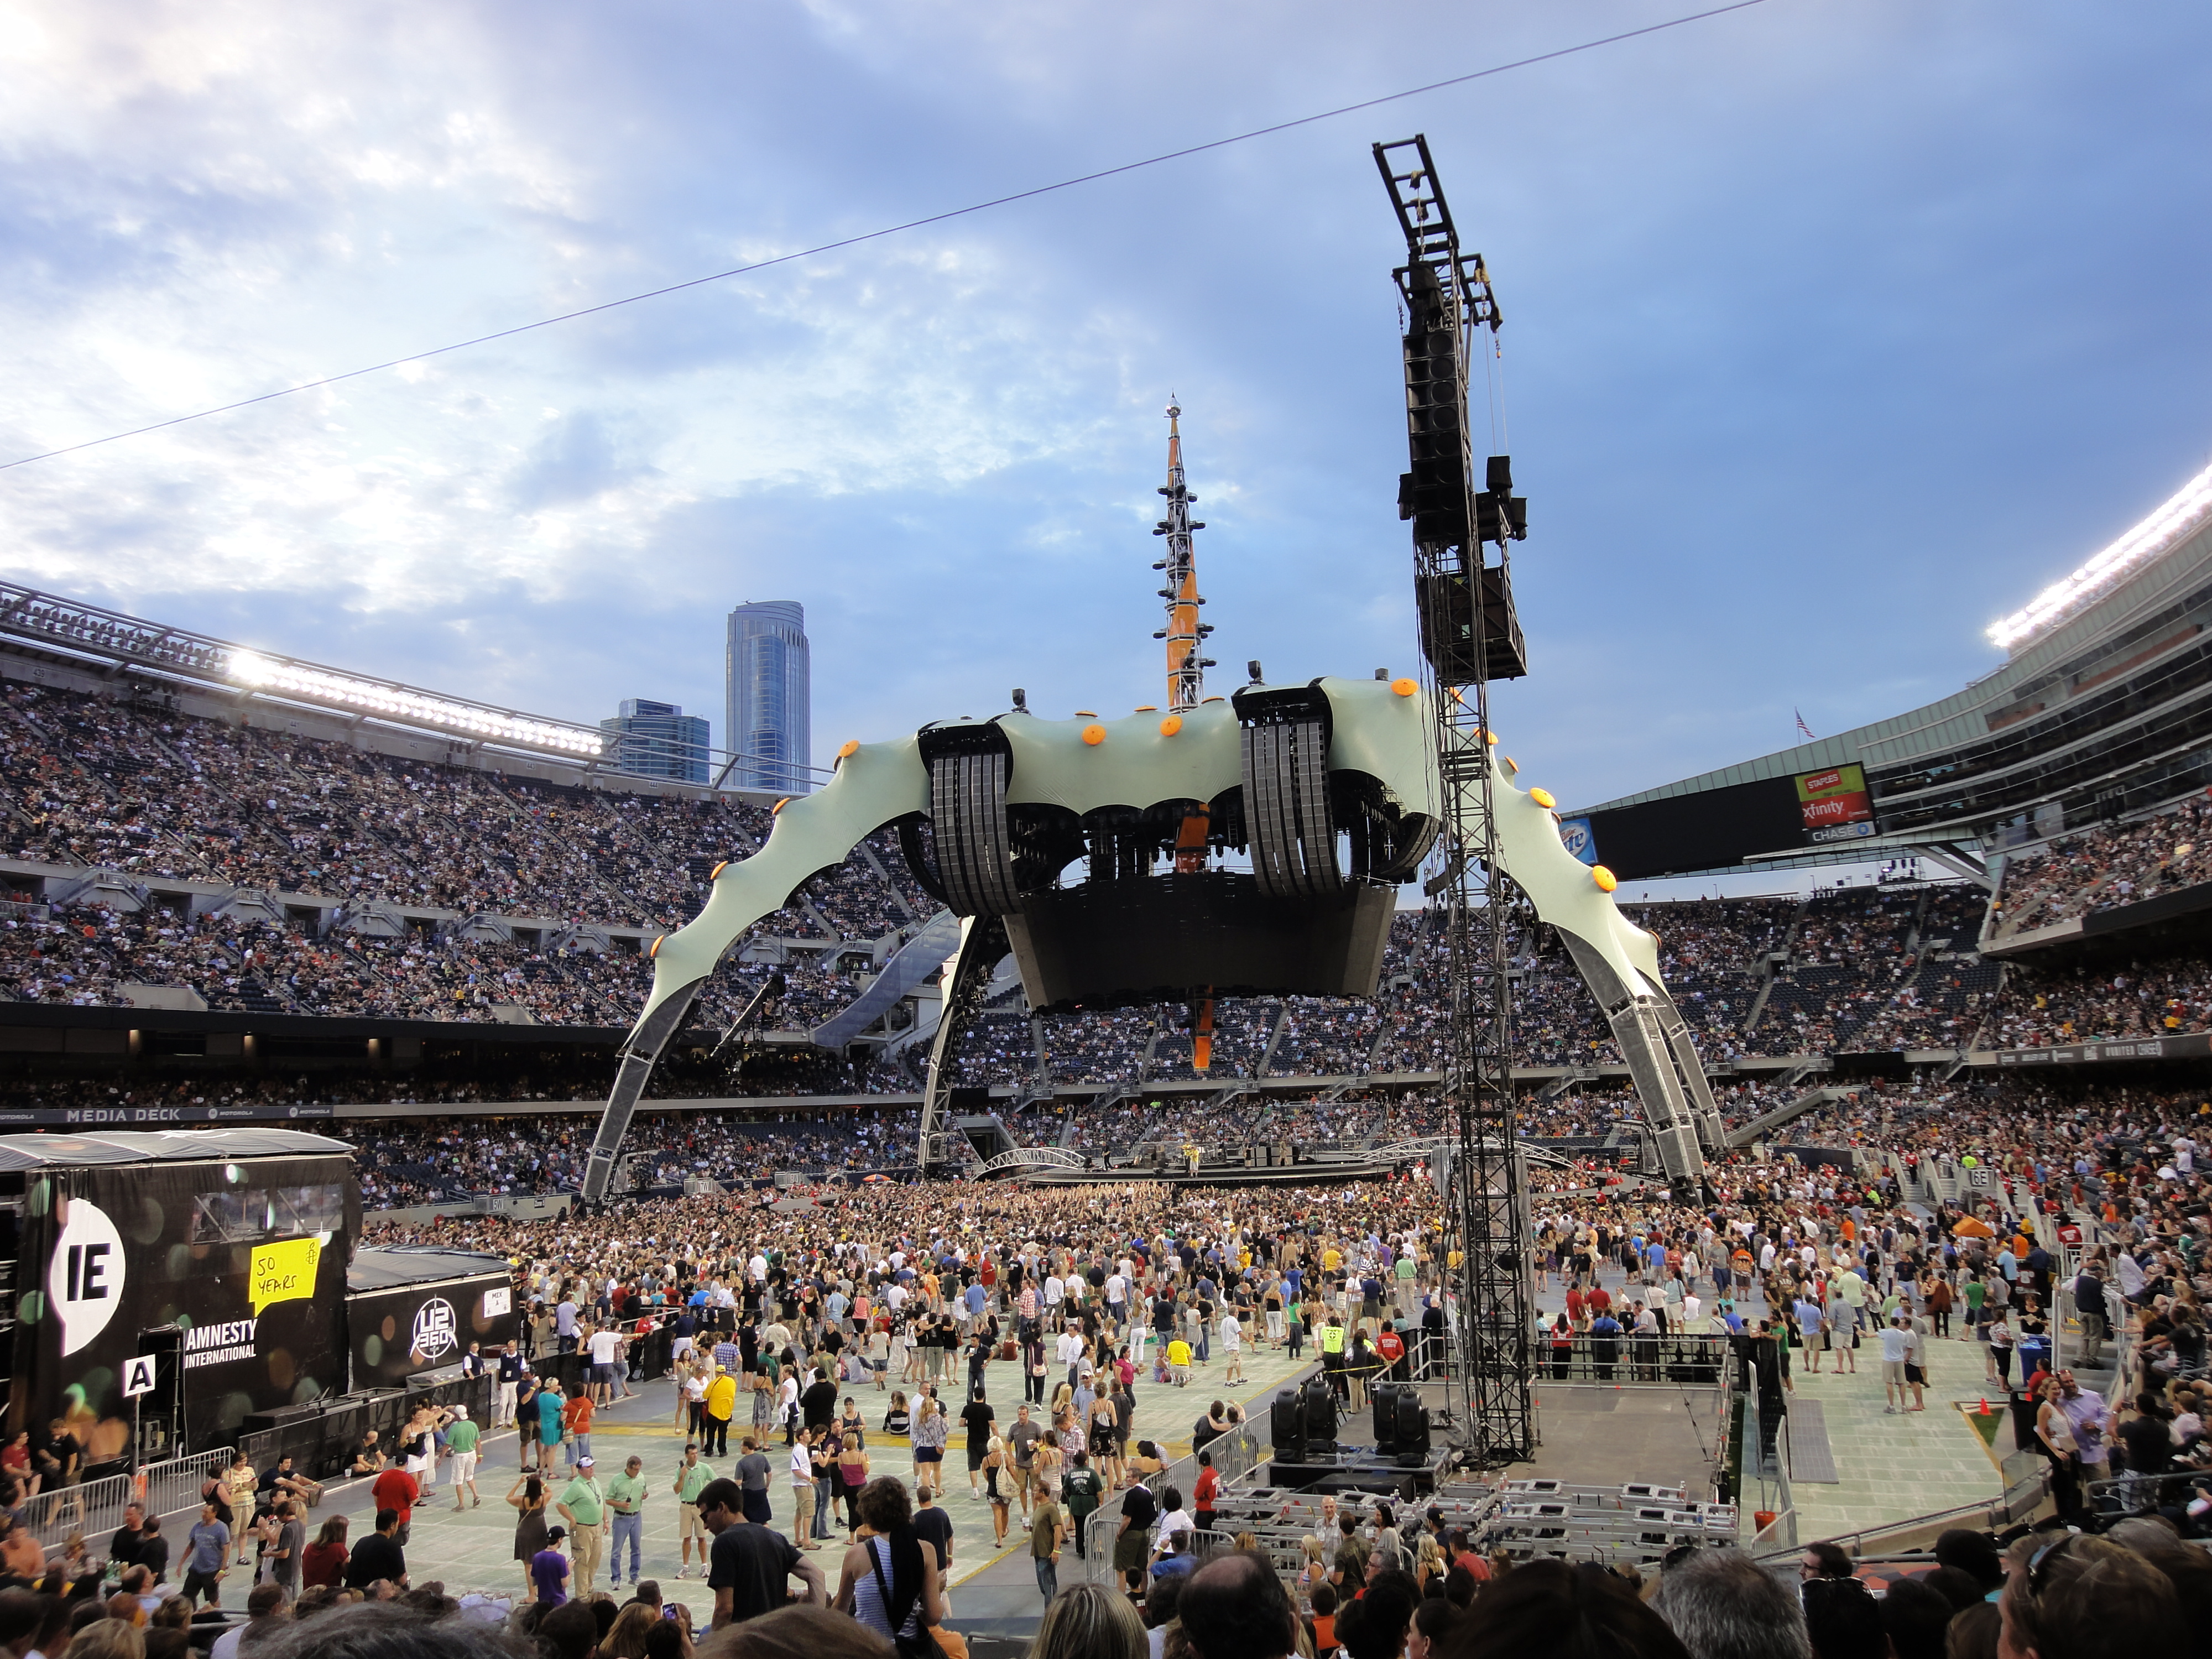 Soldier Field U2 Concert Seating Chart